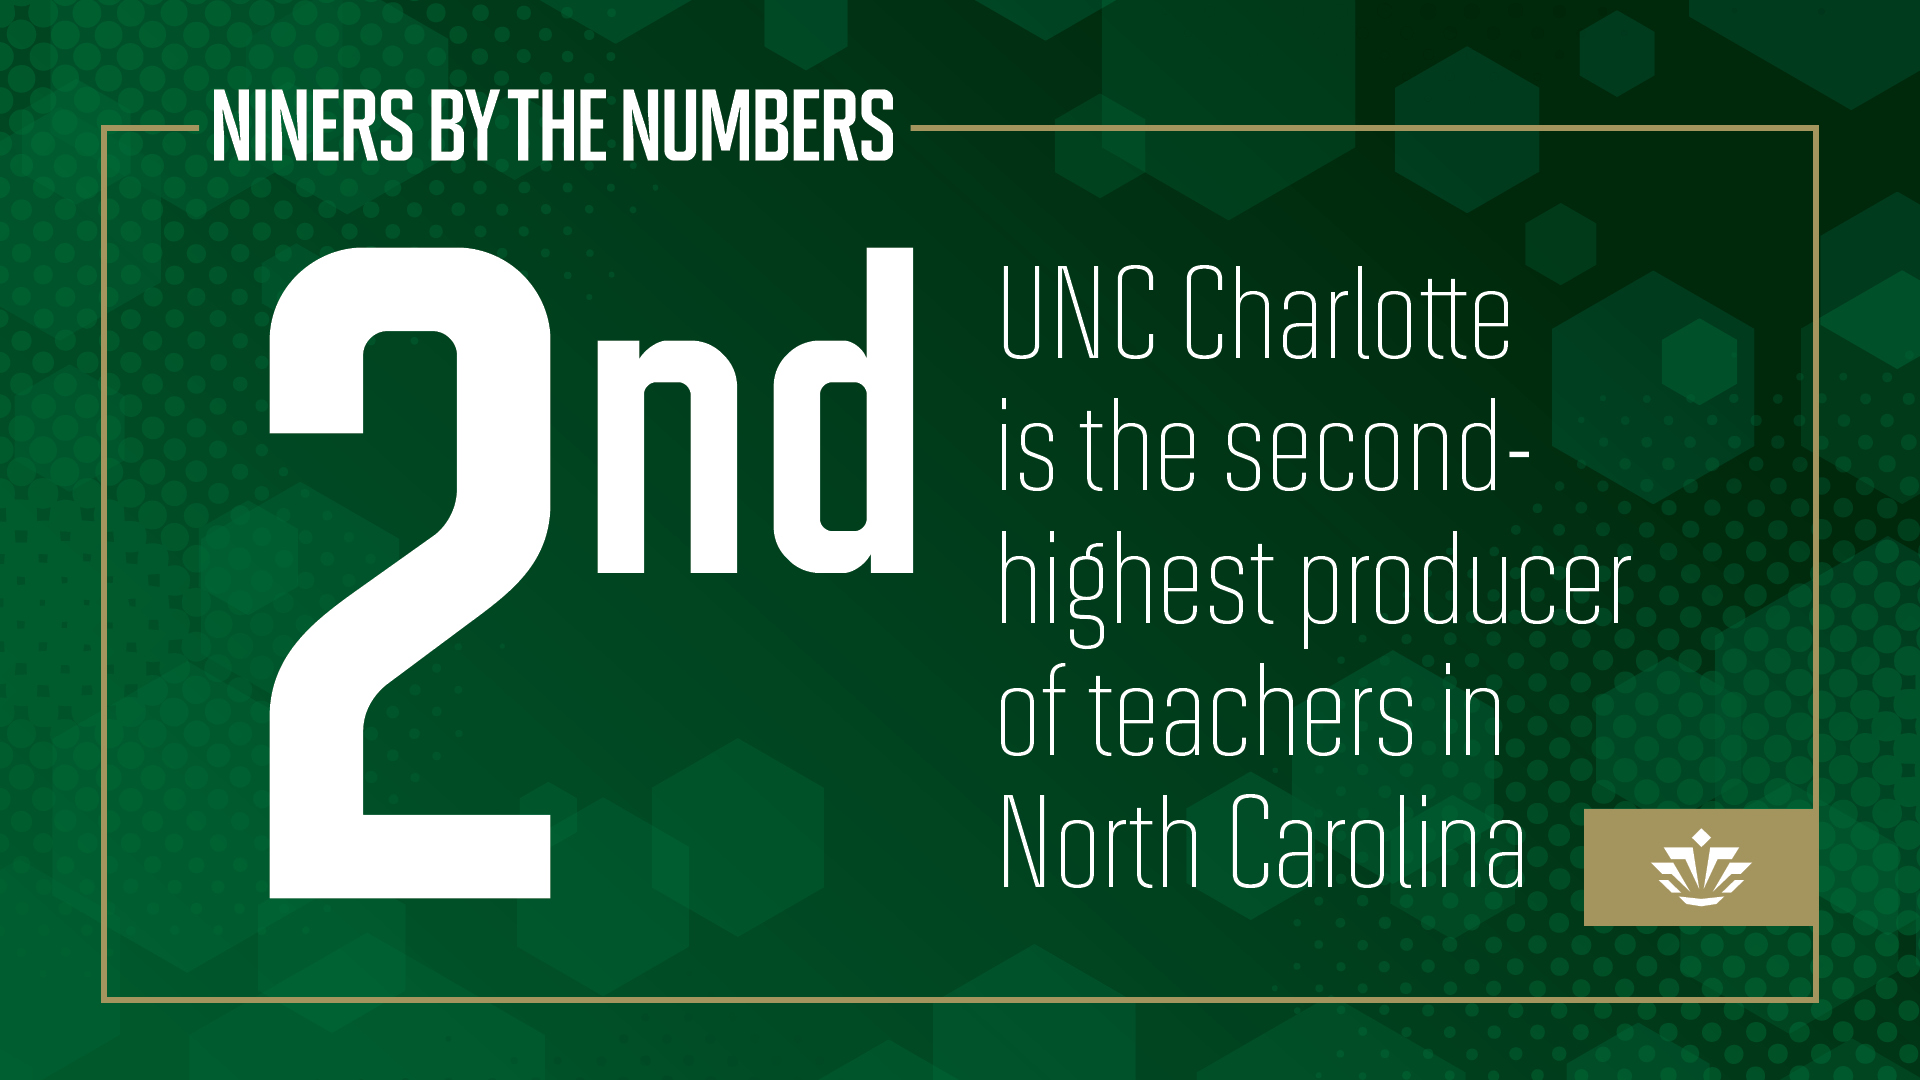 UNC Charlotte is the second-highest producer of teachers in NC